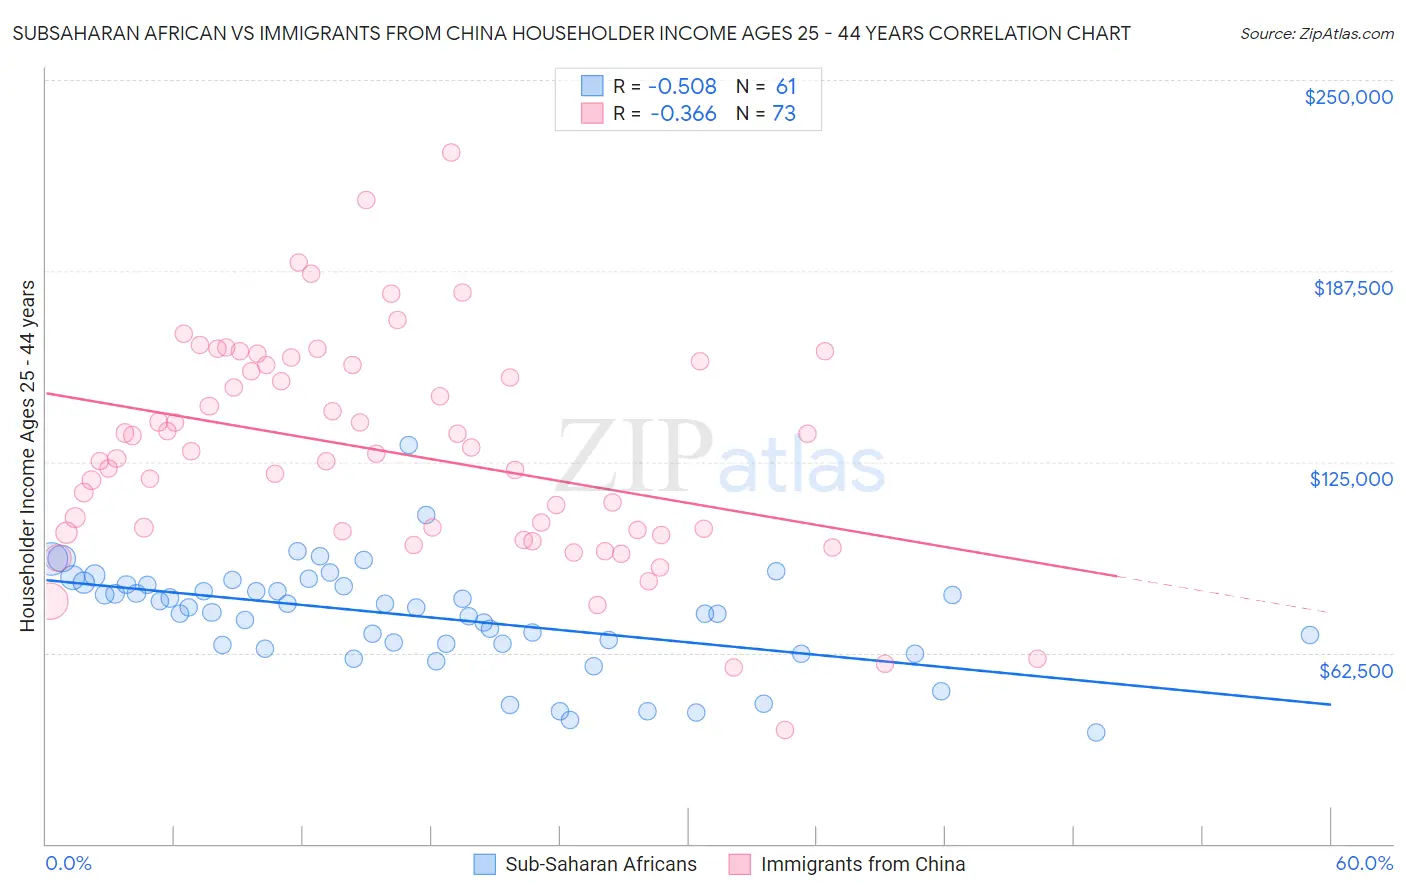 Subsaharan African vs Immigrants from China Householder Income Ages 25 - 44 years